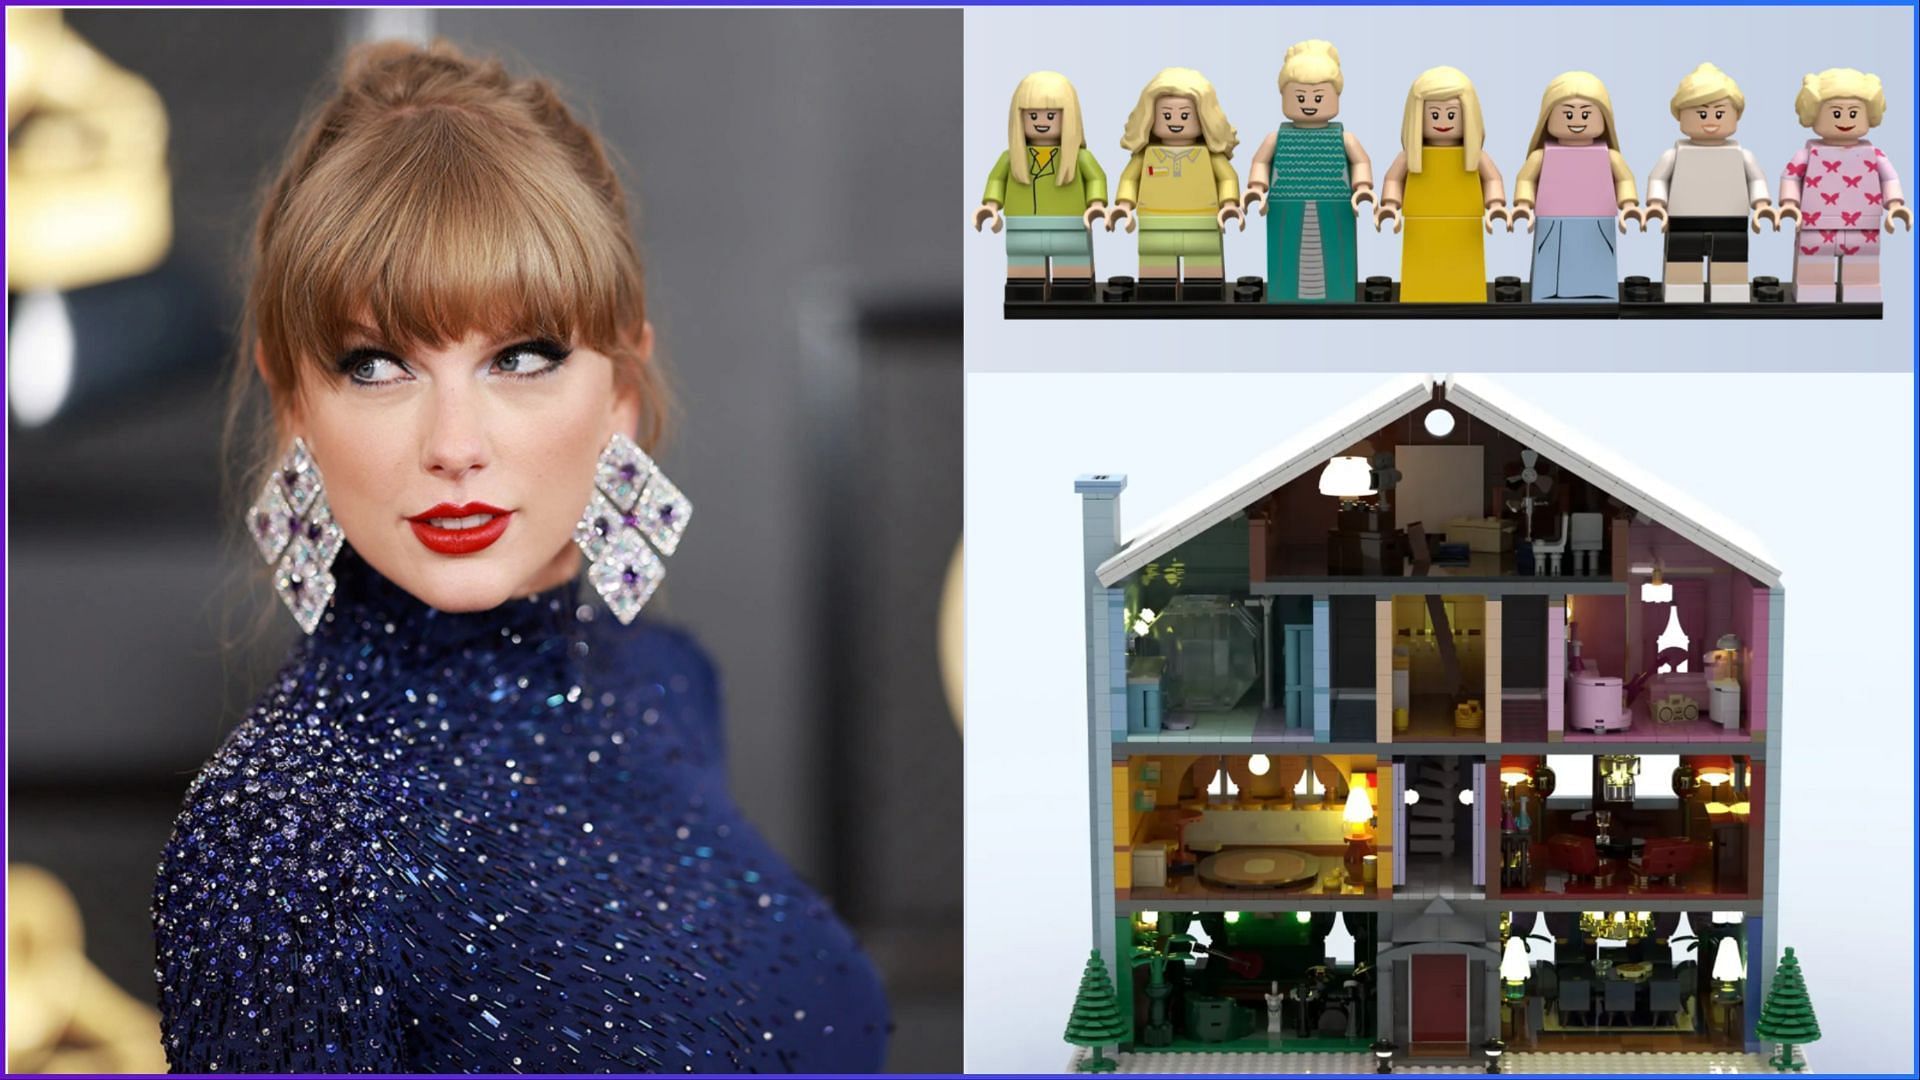 LEGO Ideas Taylor Swift - Lover House Achieves 10,000 Supporters